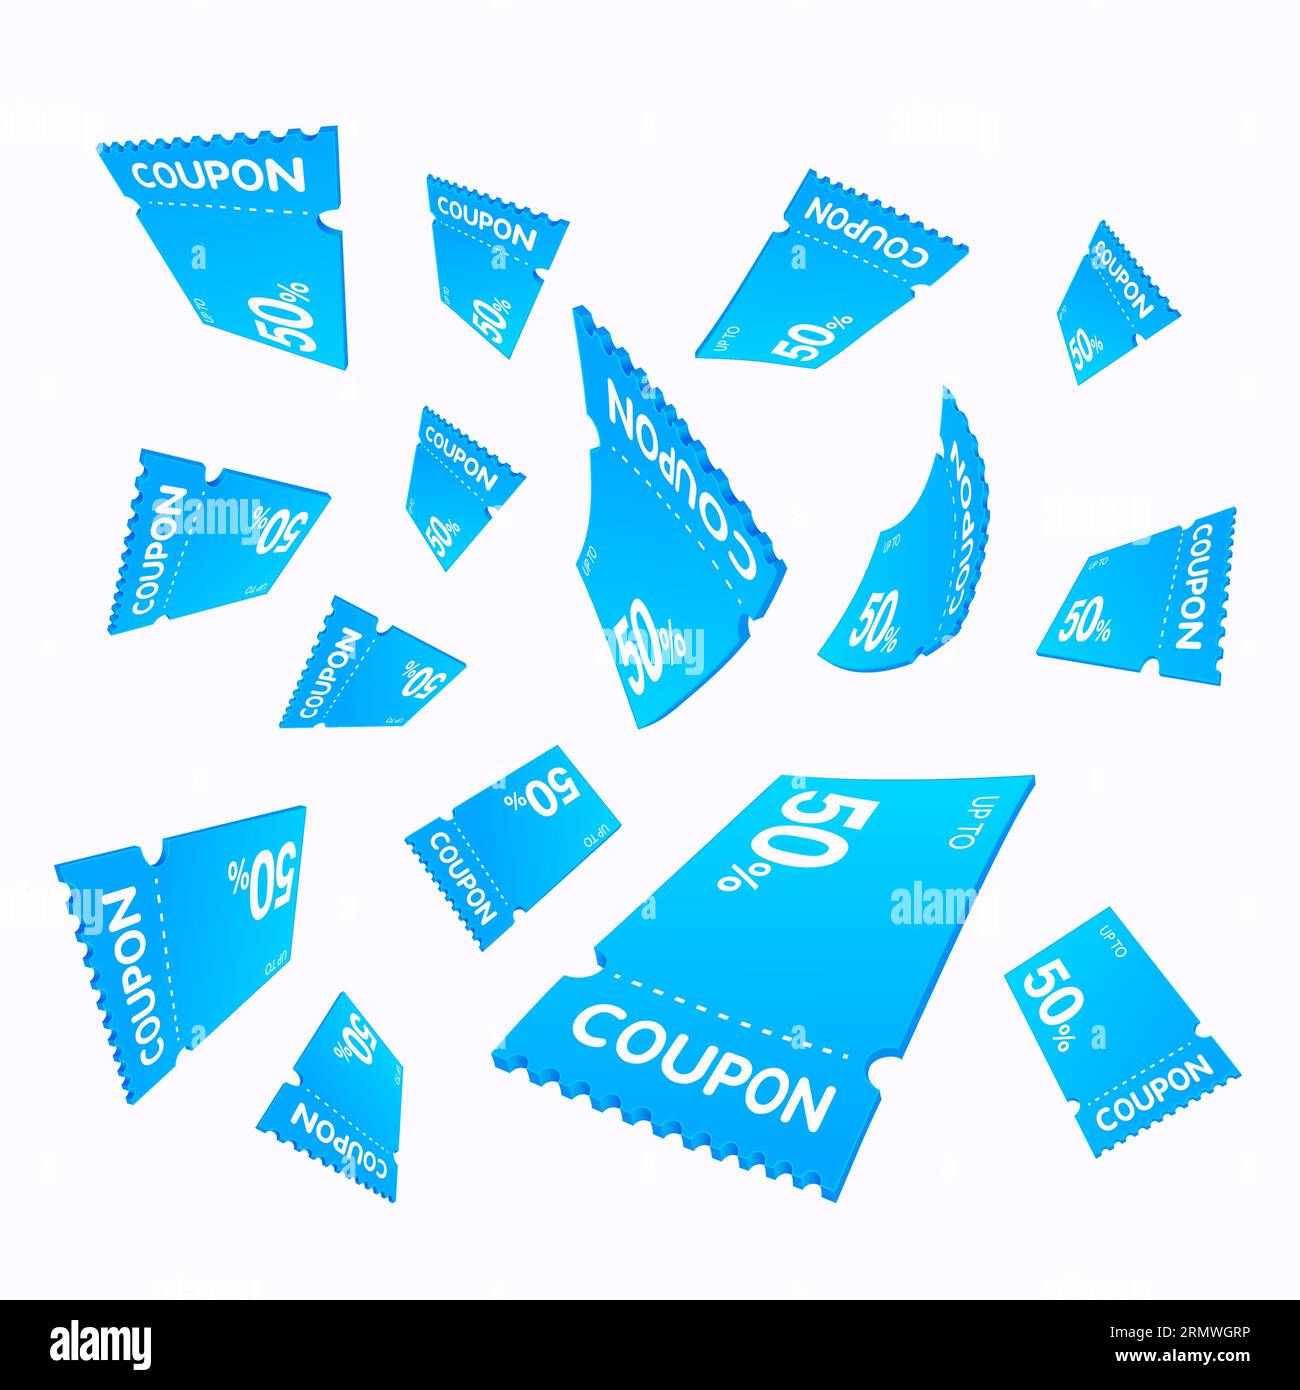 Cashback deal Stock Vector Images - Page 2 - Alamy